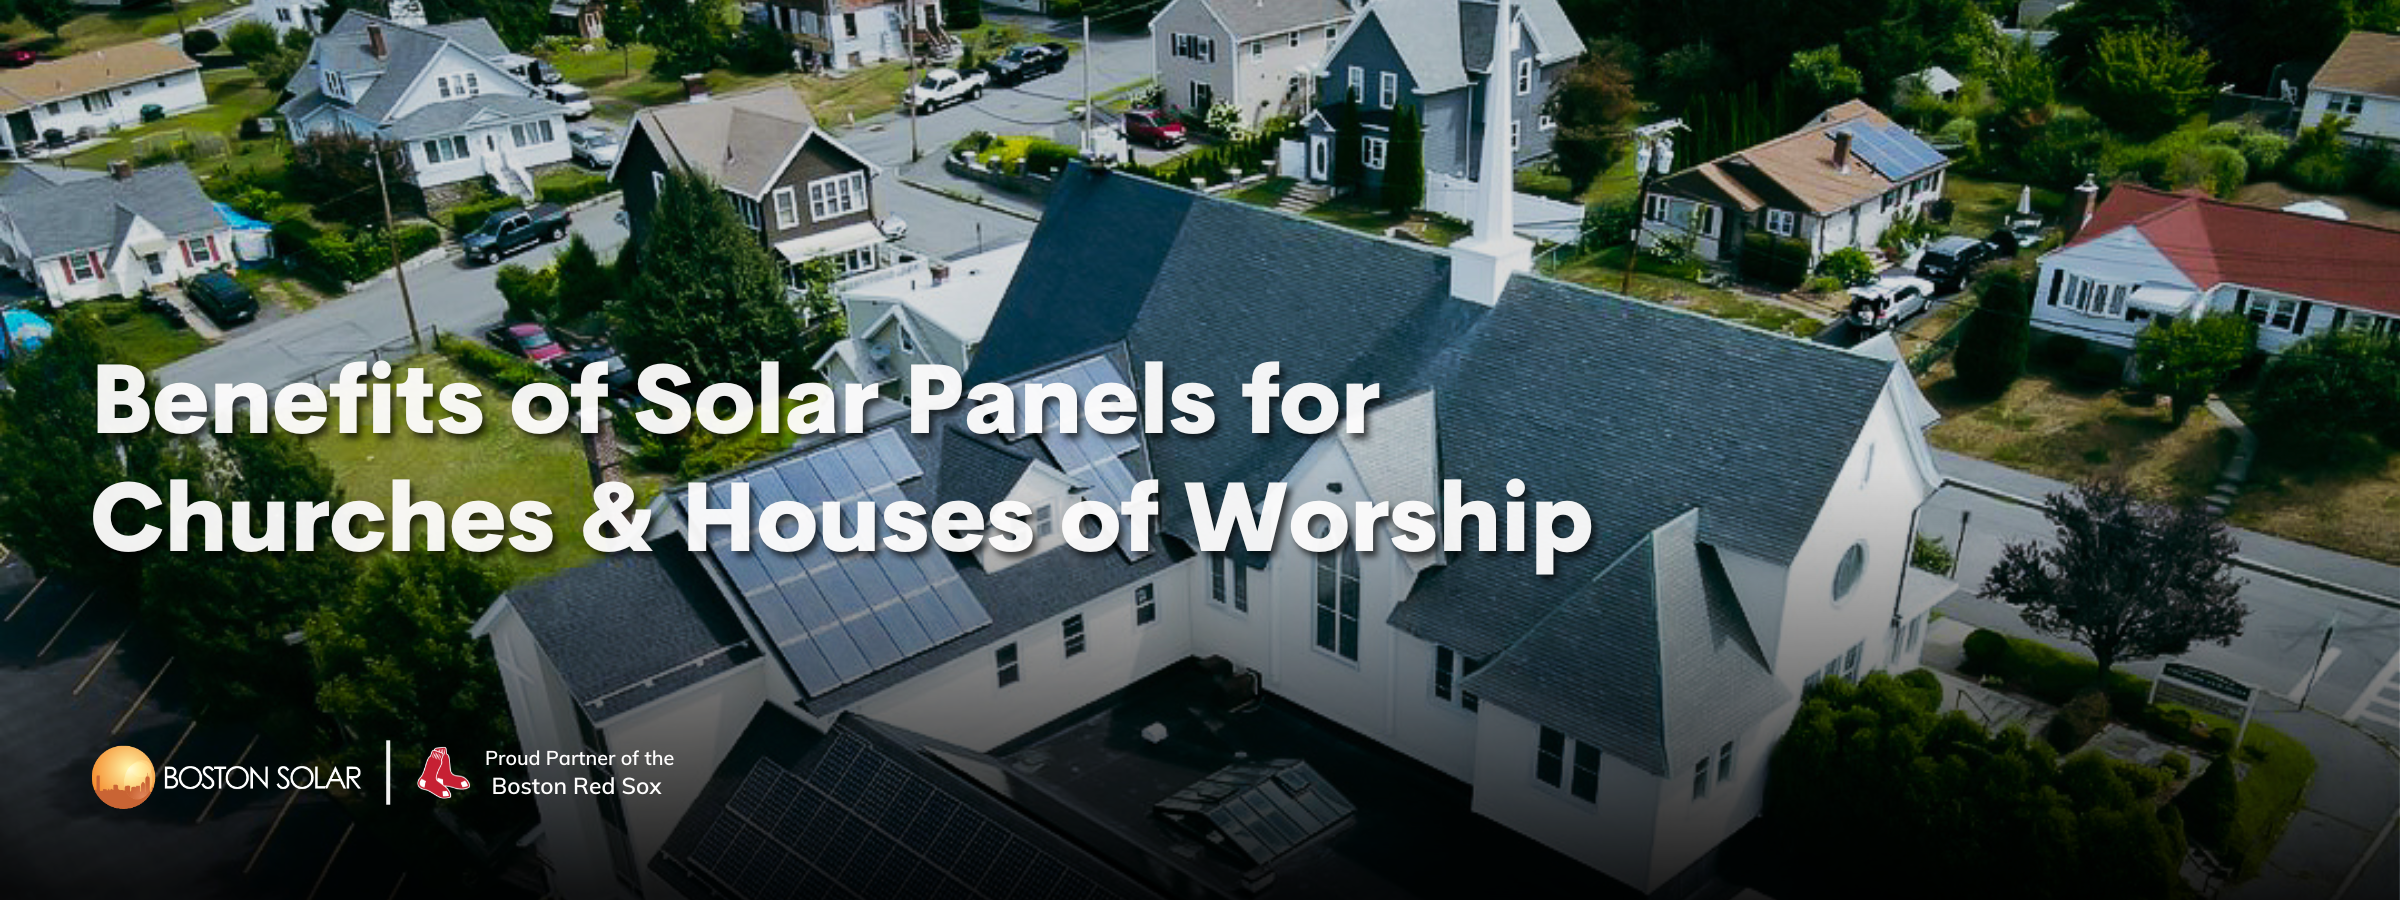 Benefits of Solar Panels for Churches & Houses of Worship